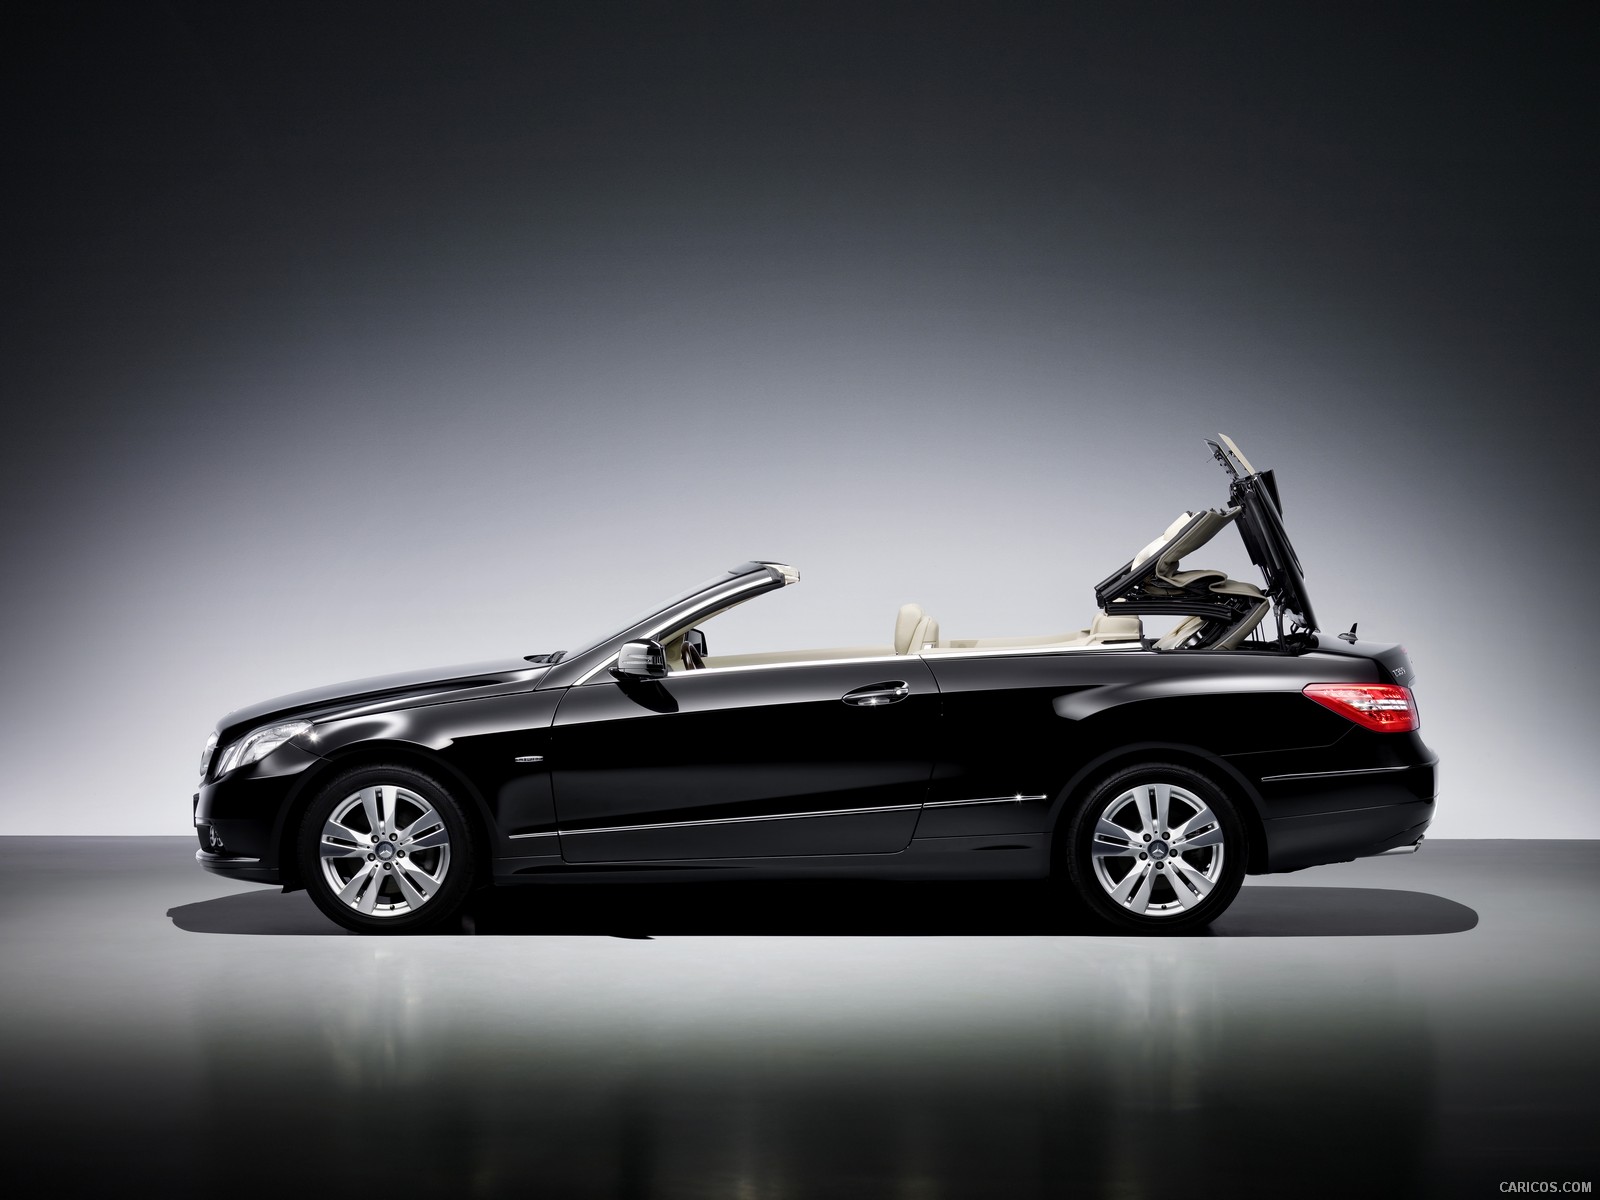 Mercedes-Benz E-Class Cabriolet - Top In Action - , #78 of 165